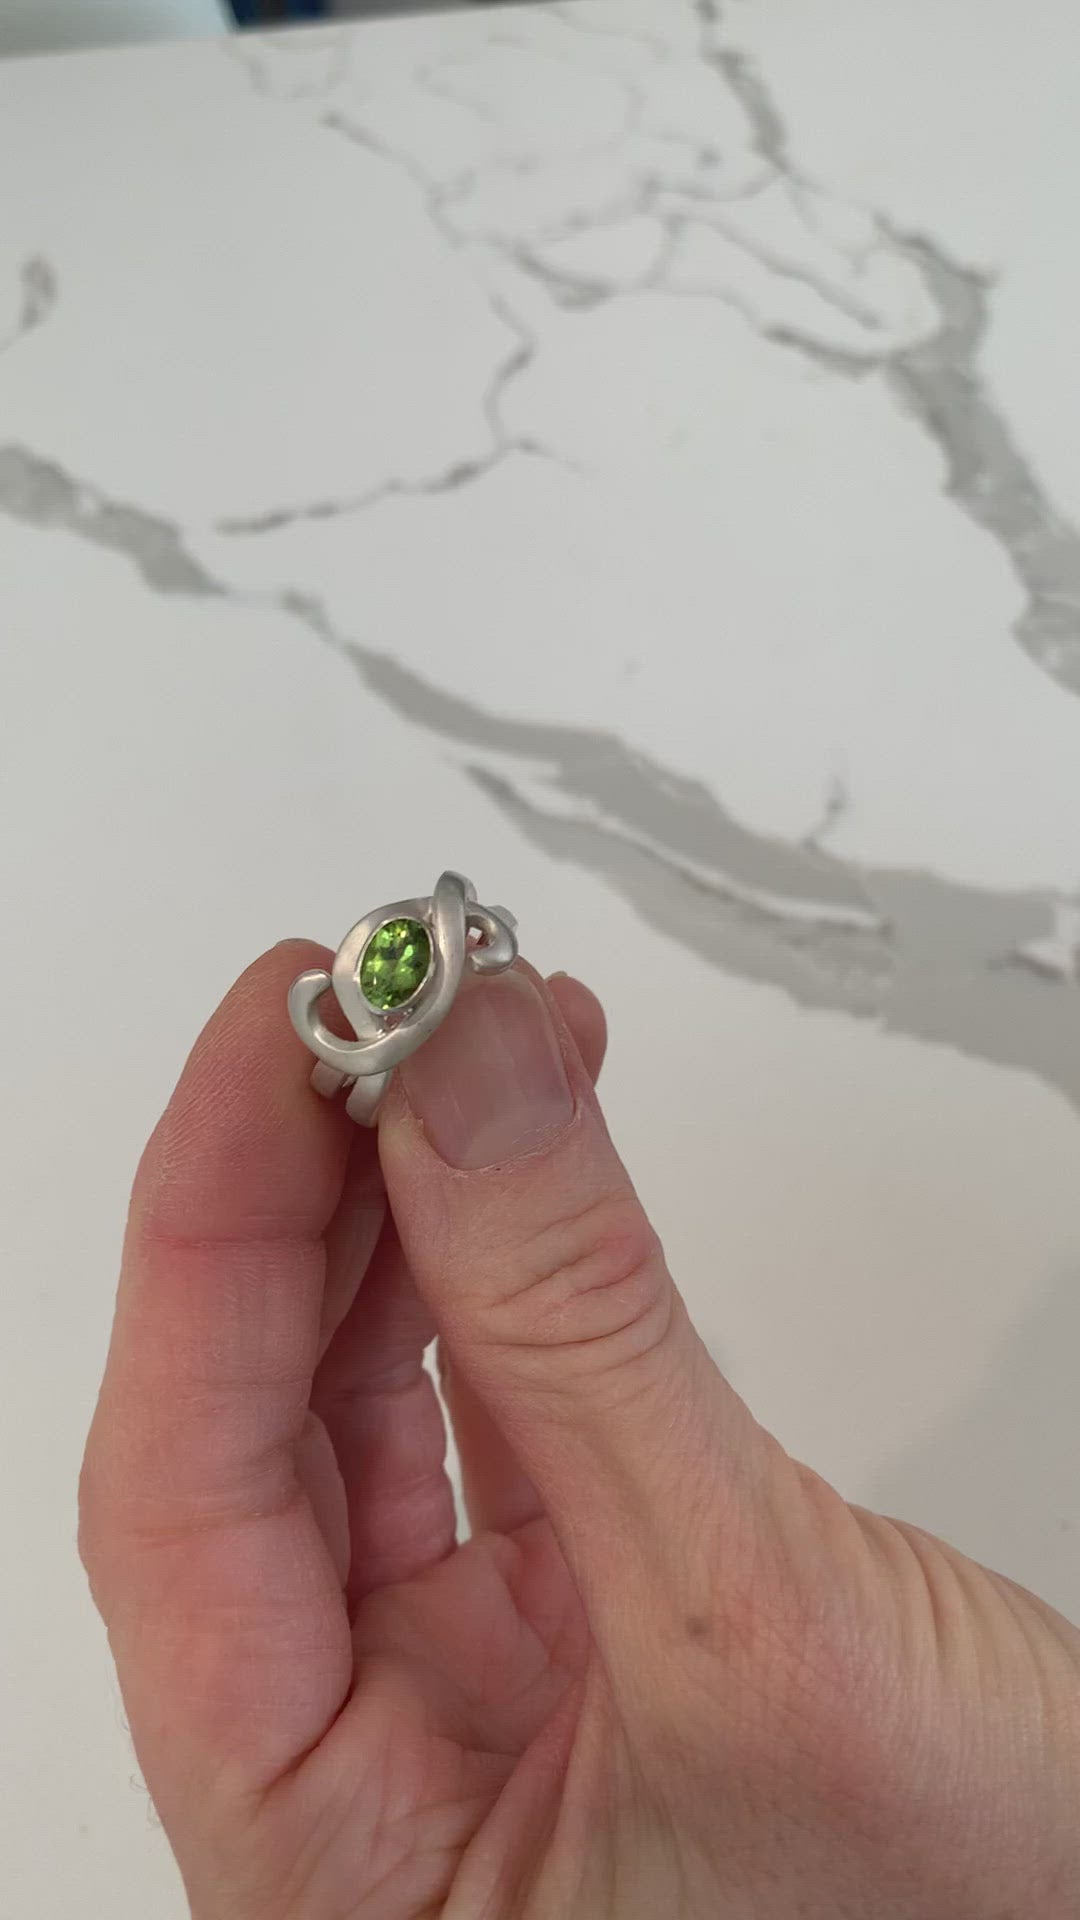 Video detail of peridot enfoldment ring by ZEALmetal, Nicole Horlor, in Kingston, ON, Canada